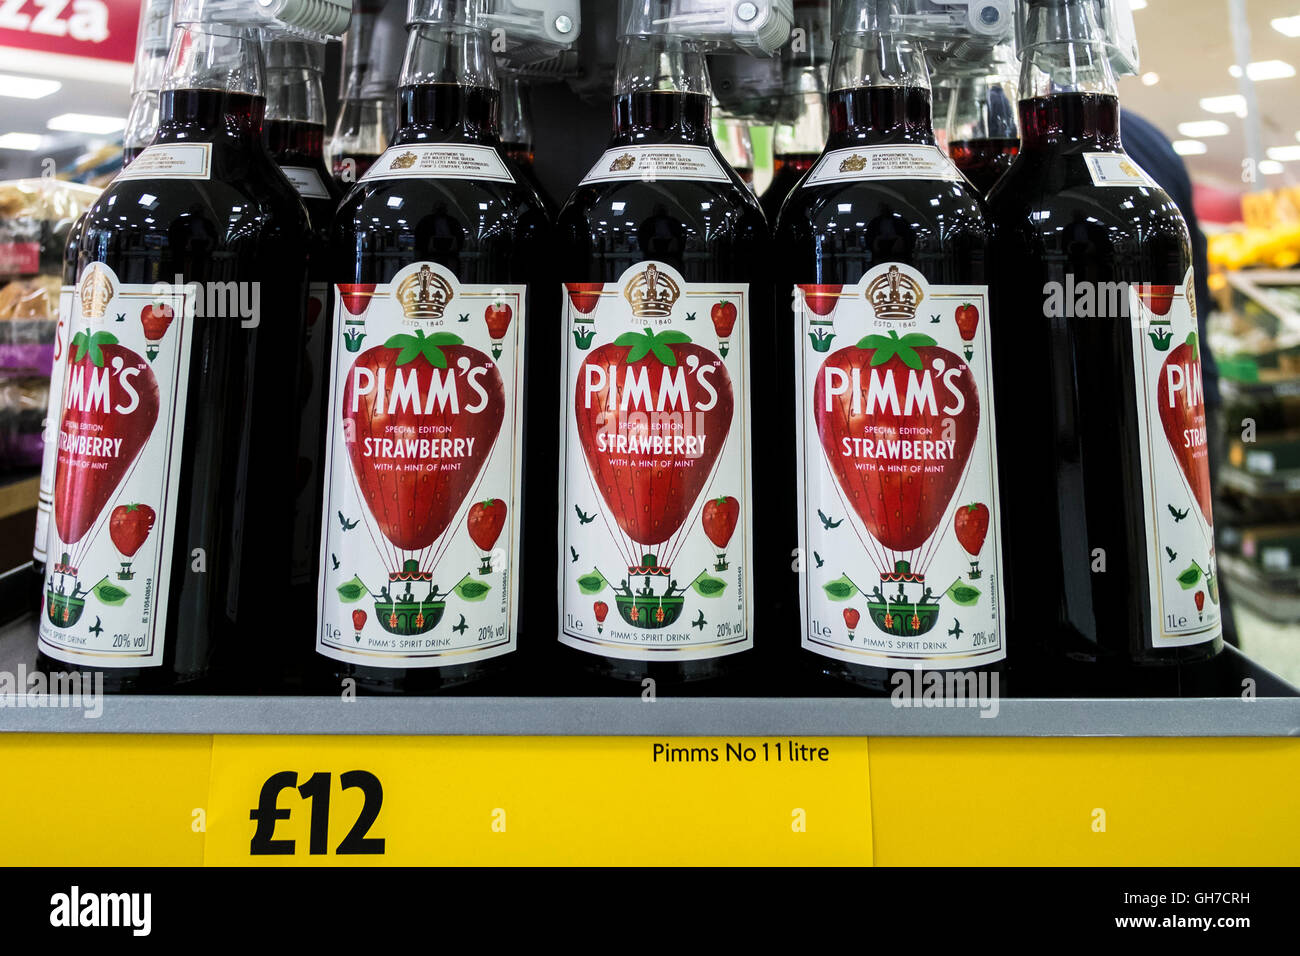 A display of bottles of PIMMS special edition Strawberry in a supermarket.. Stock Photo